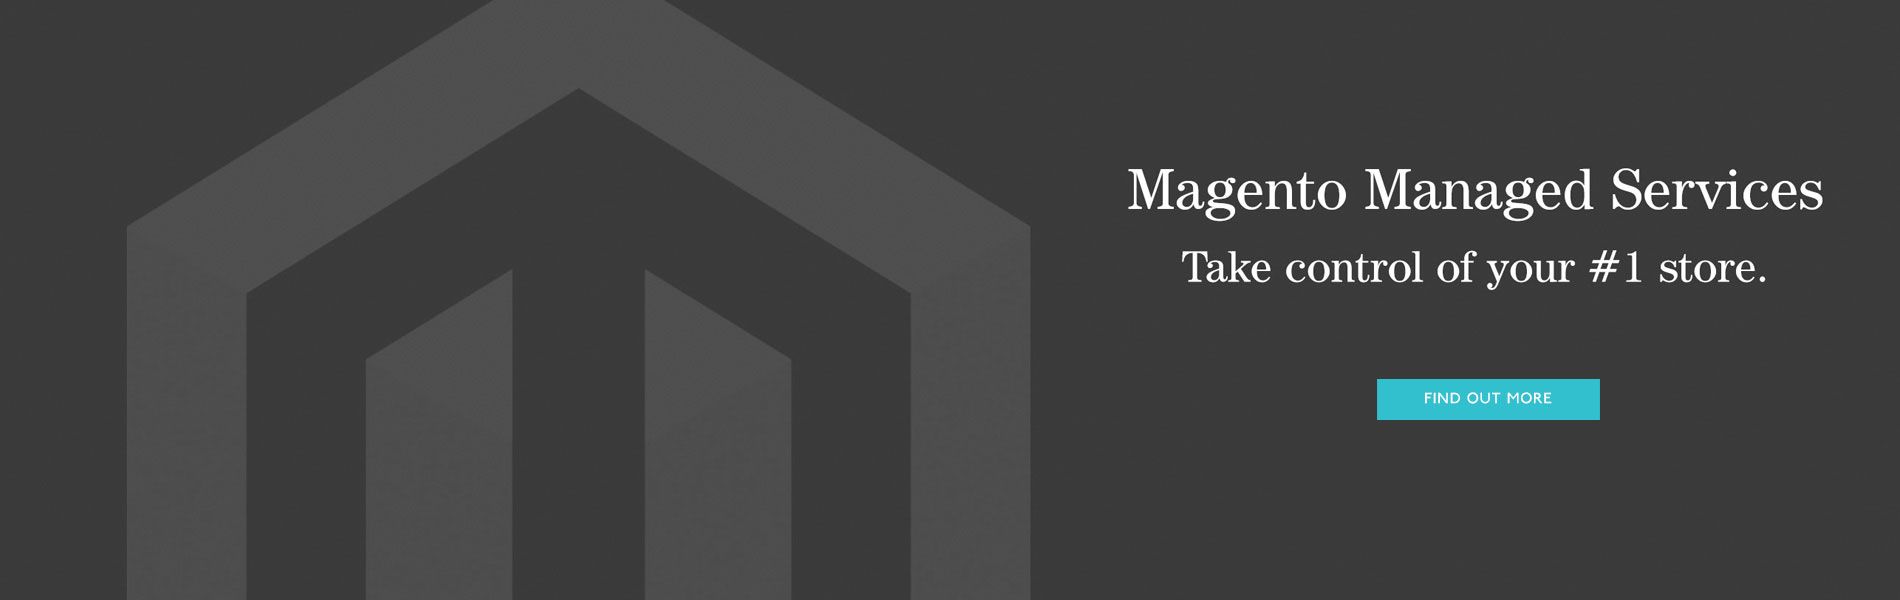 Magento Managed Services